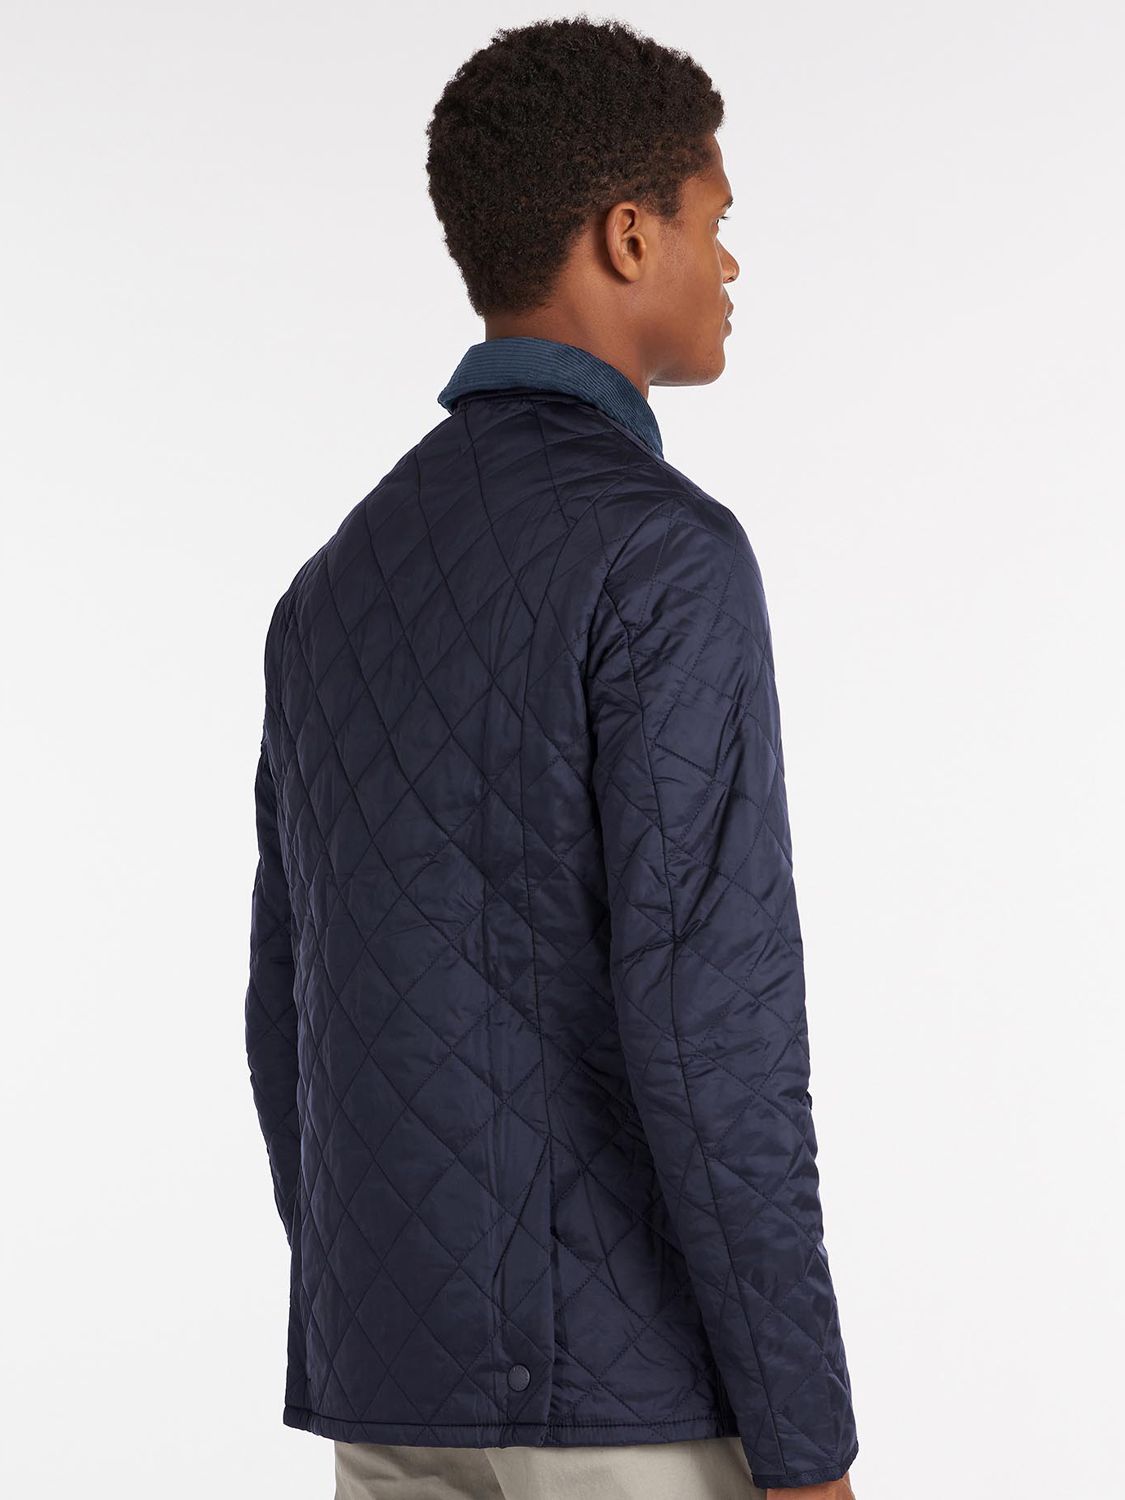 Barbour Heritage Liddesdale Quilted Jacket, Navy, S